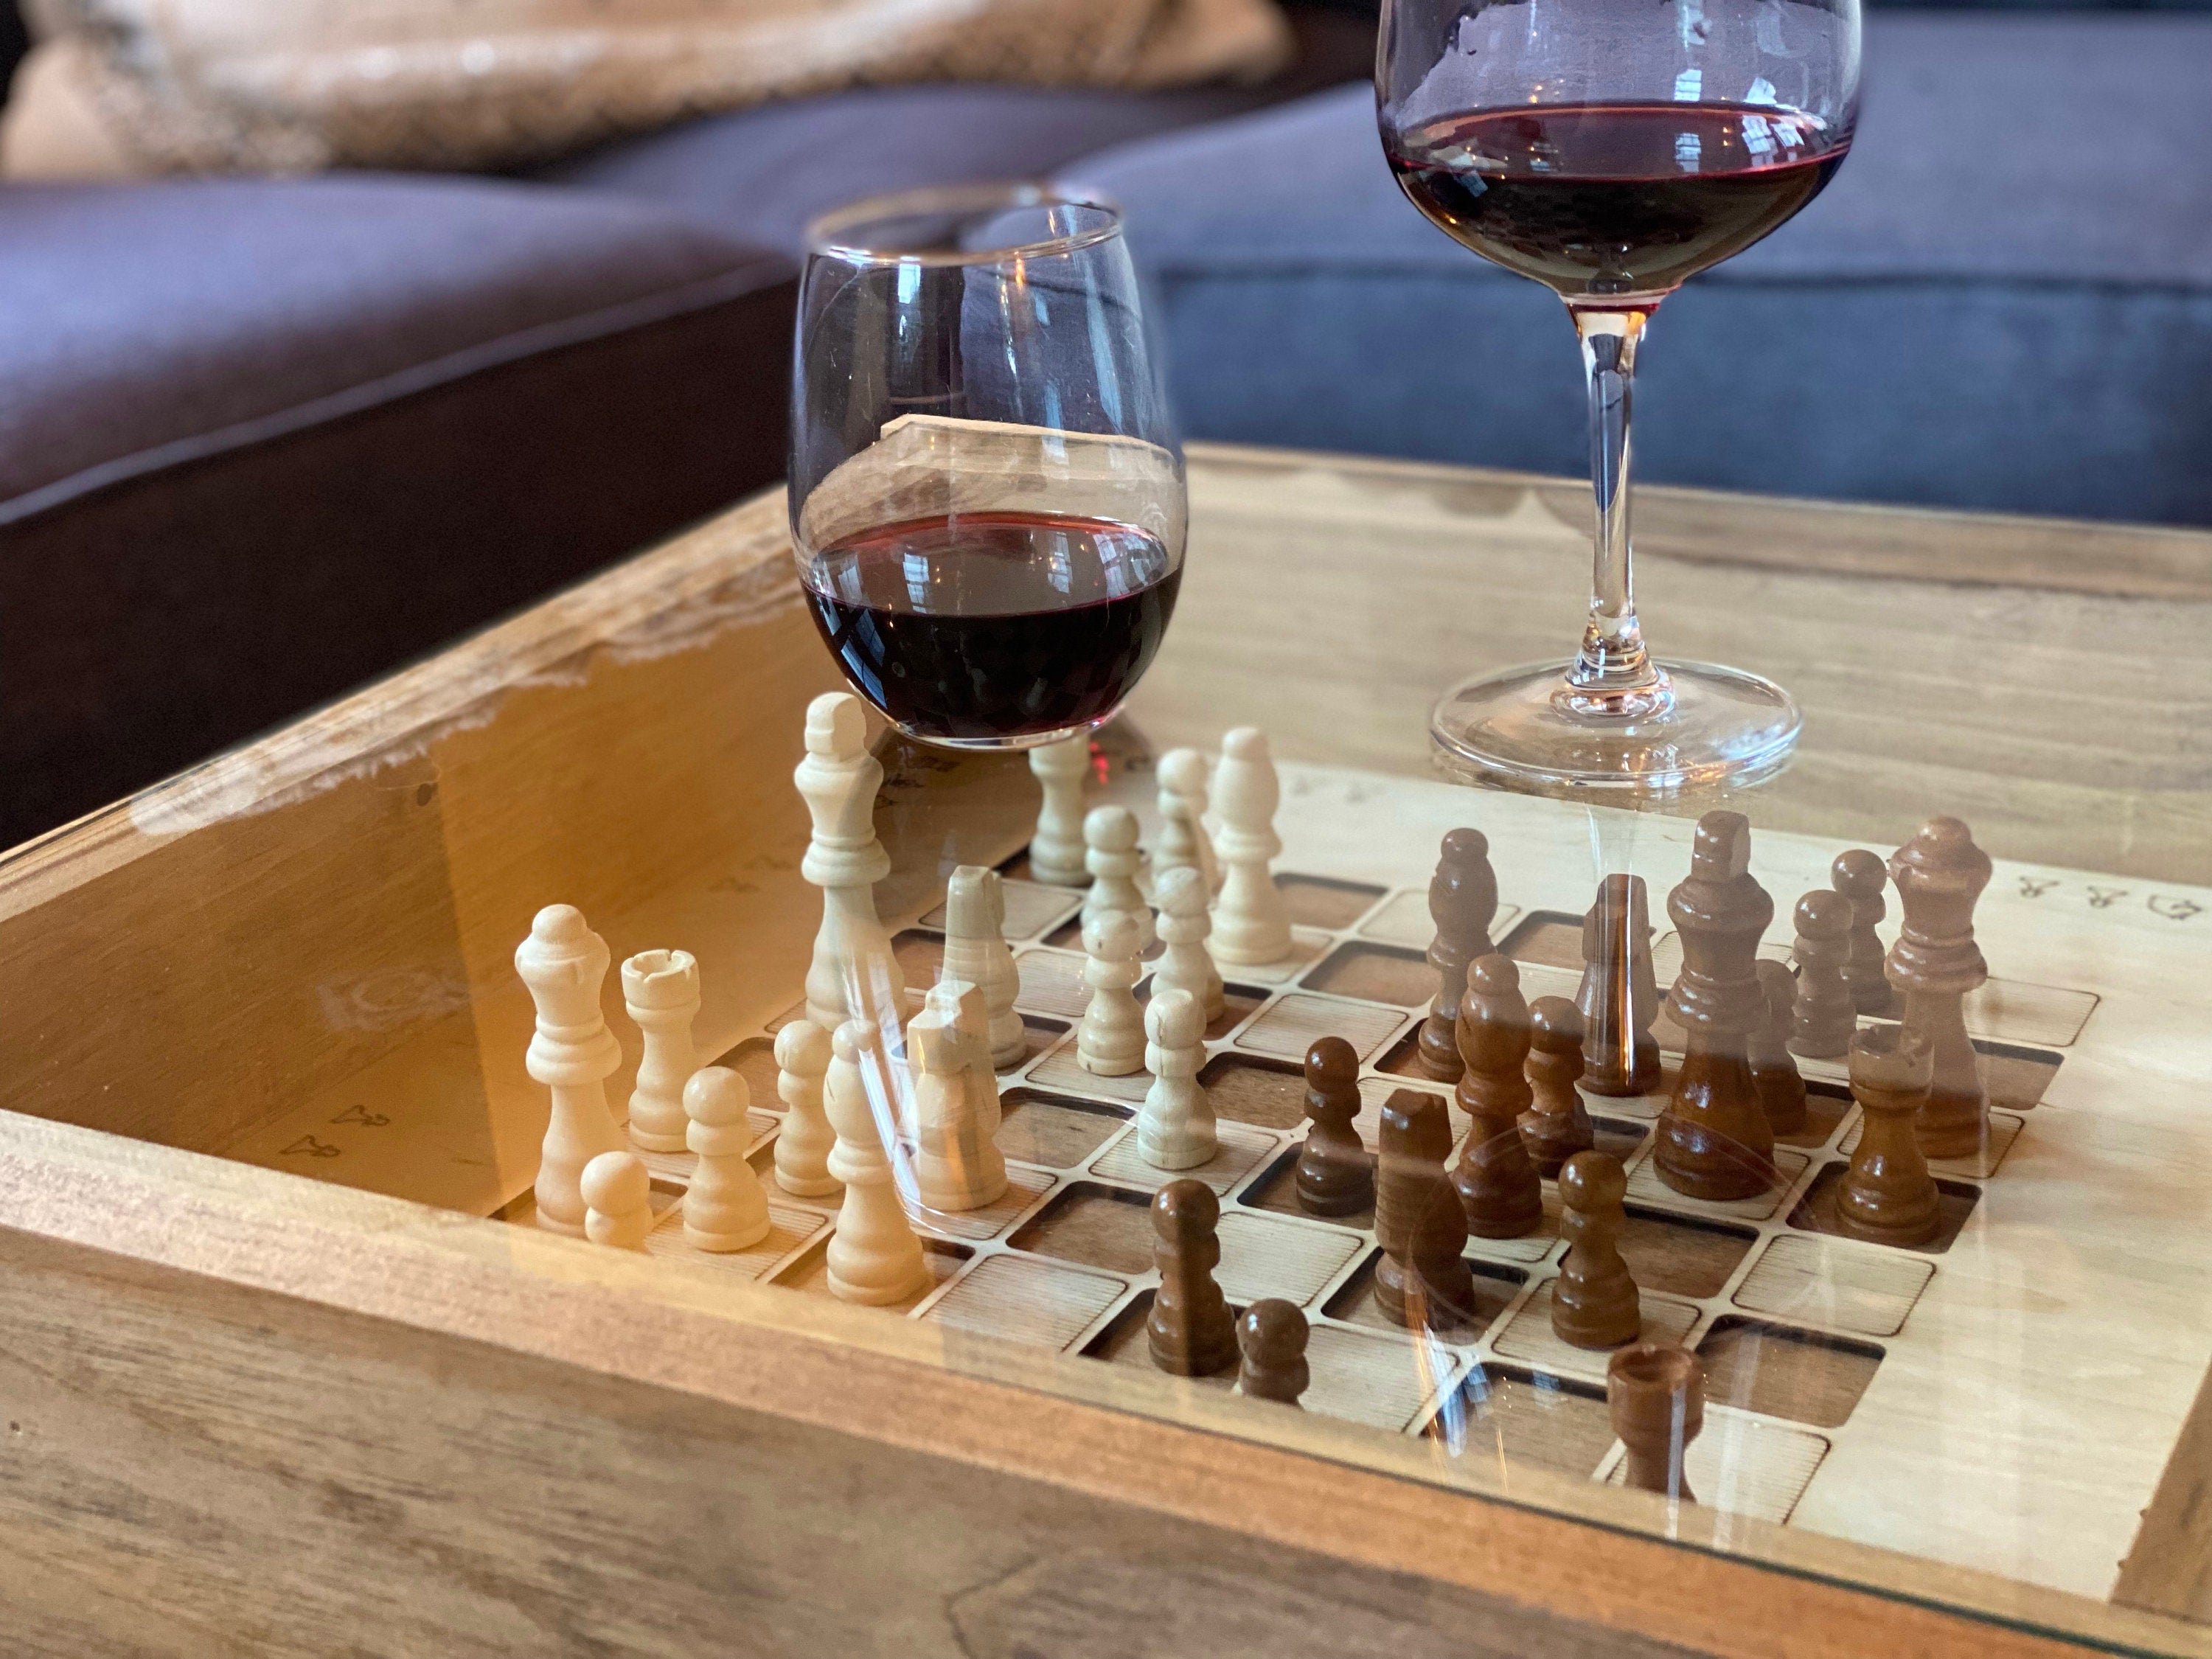 Rustic Chess and Checkers Table with removable glass top - chess and checkers pieces included. 100% Made in the USA